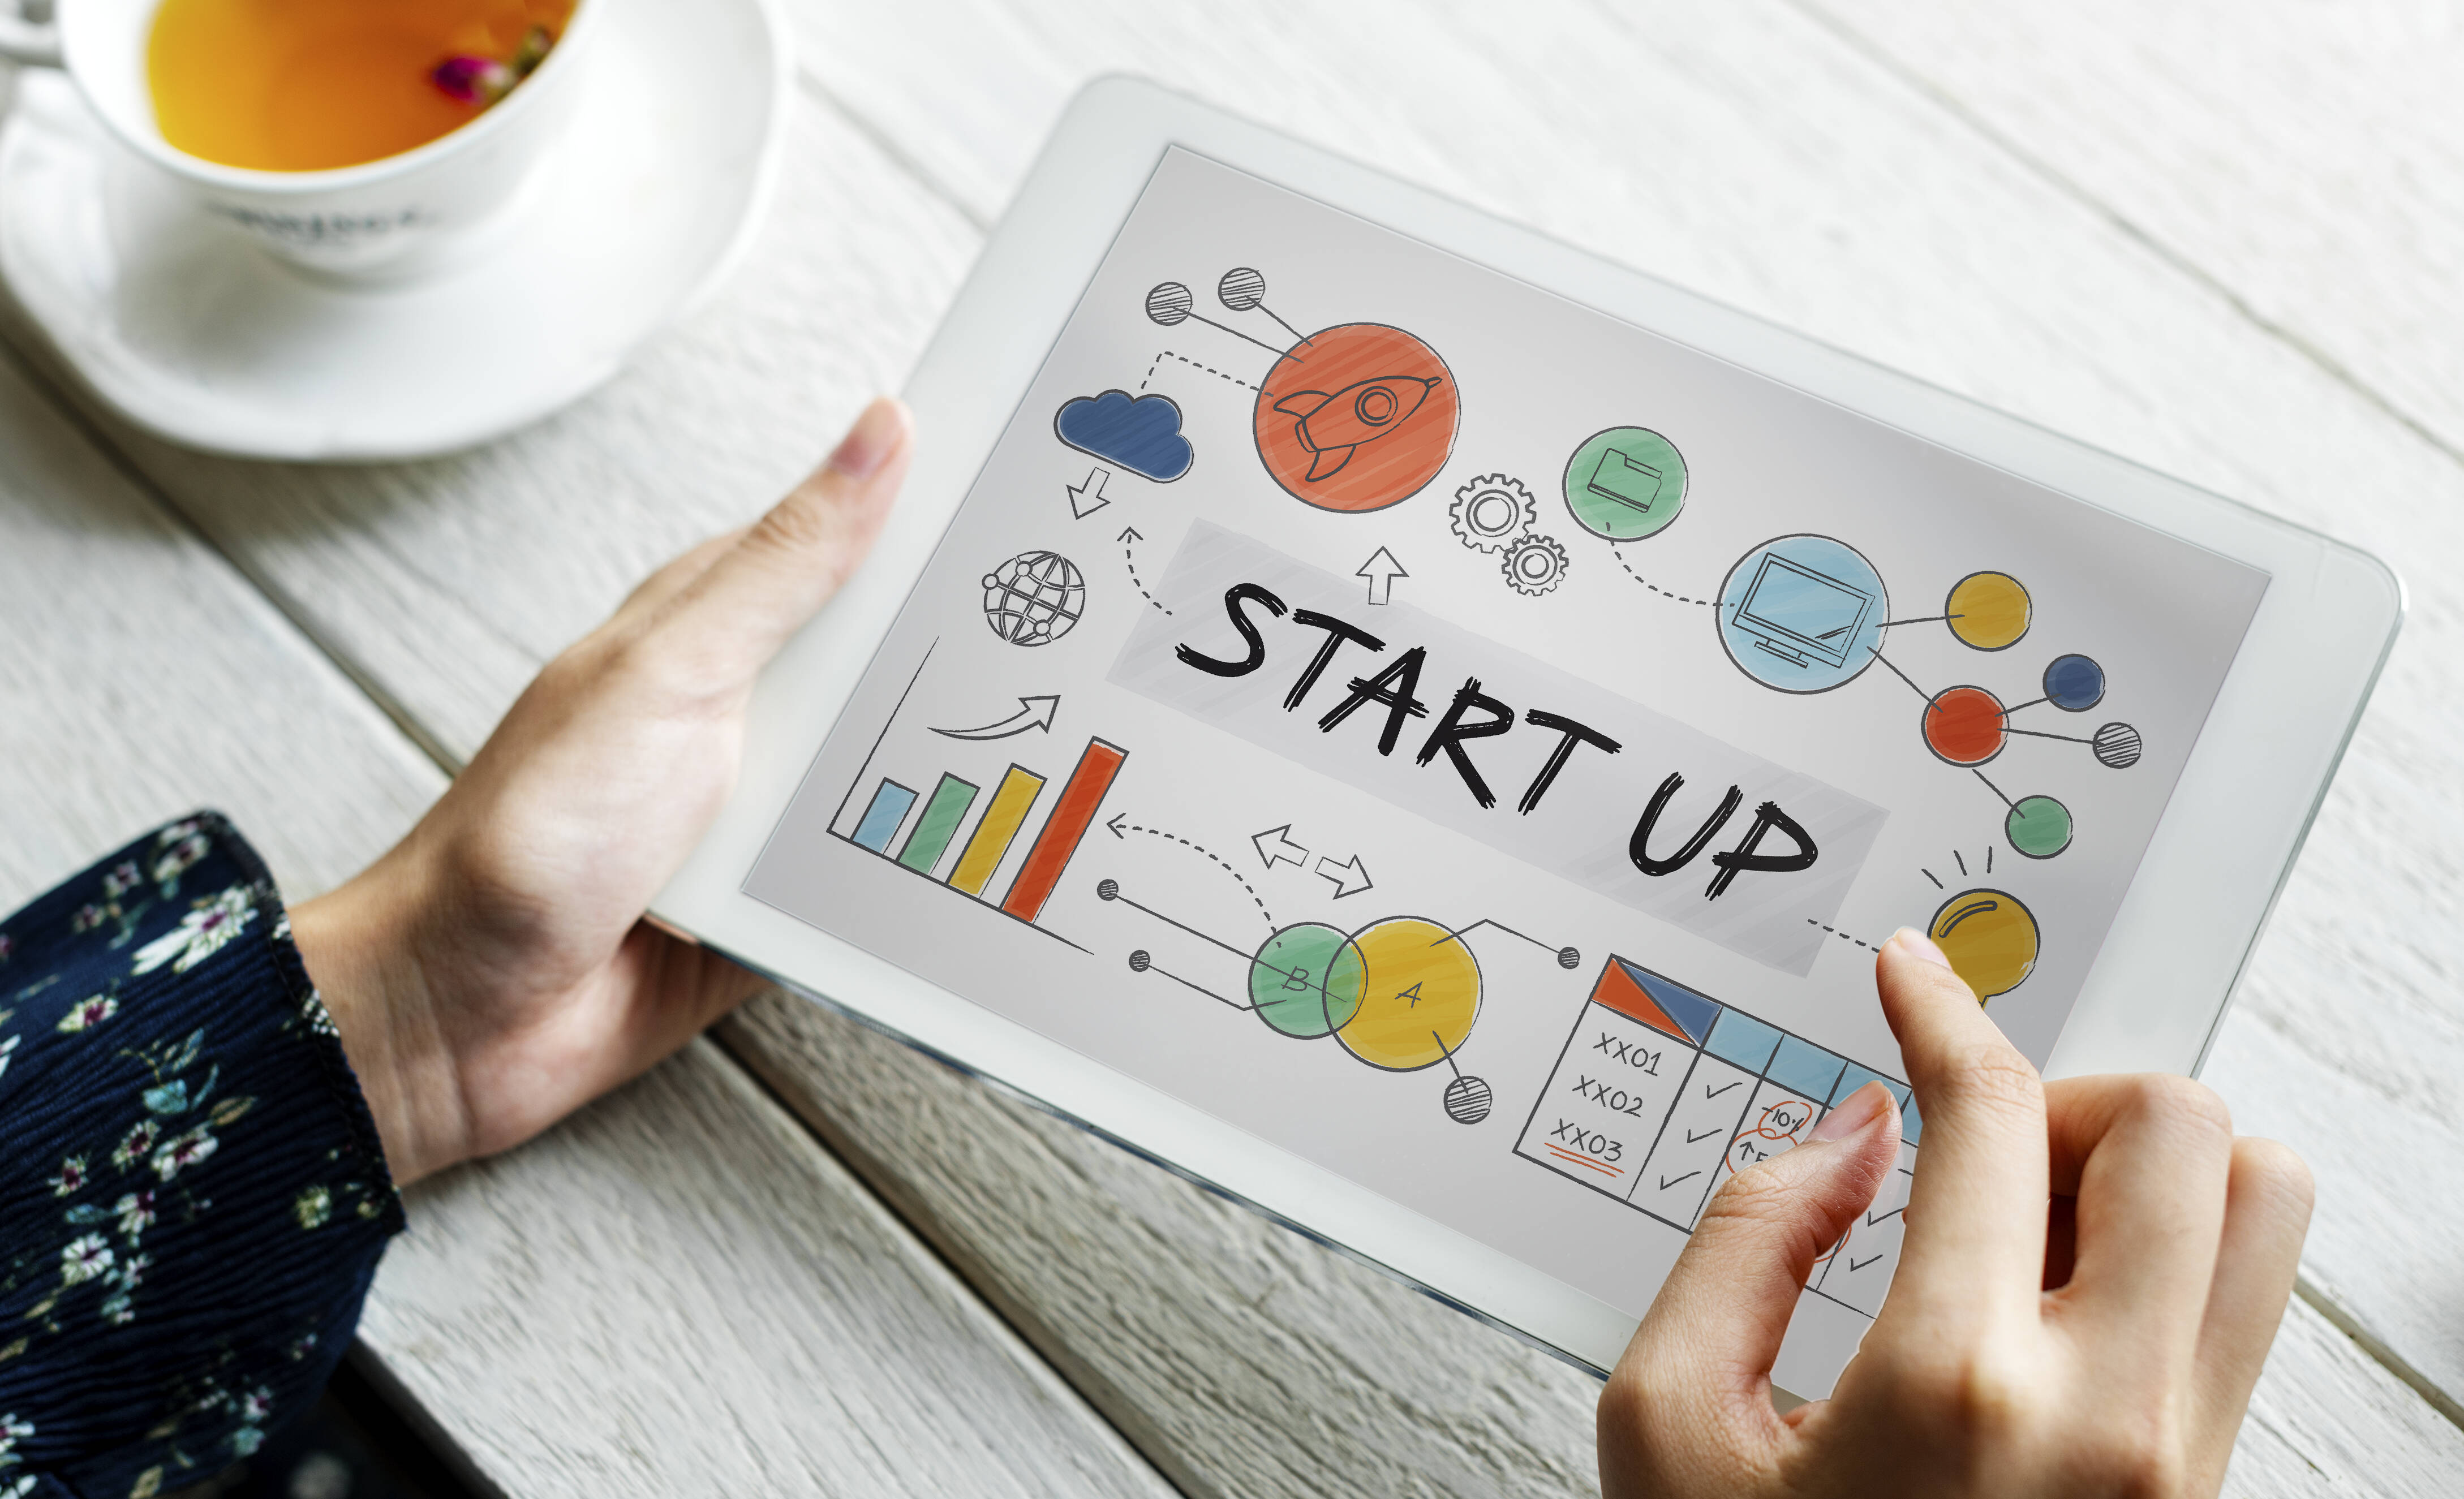 Top 11 Startup Websites That Will Ignite Your Entrepreneurial Spirit